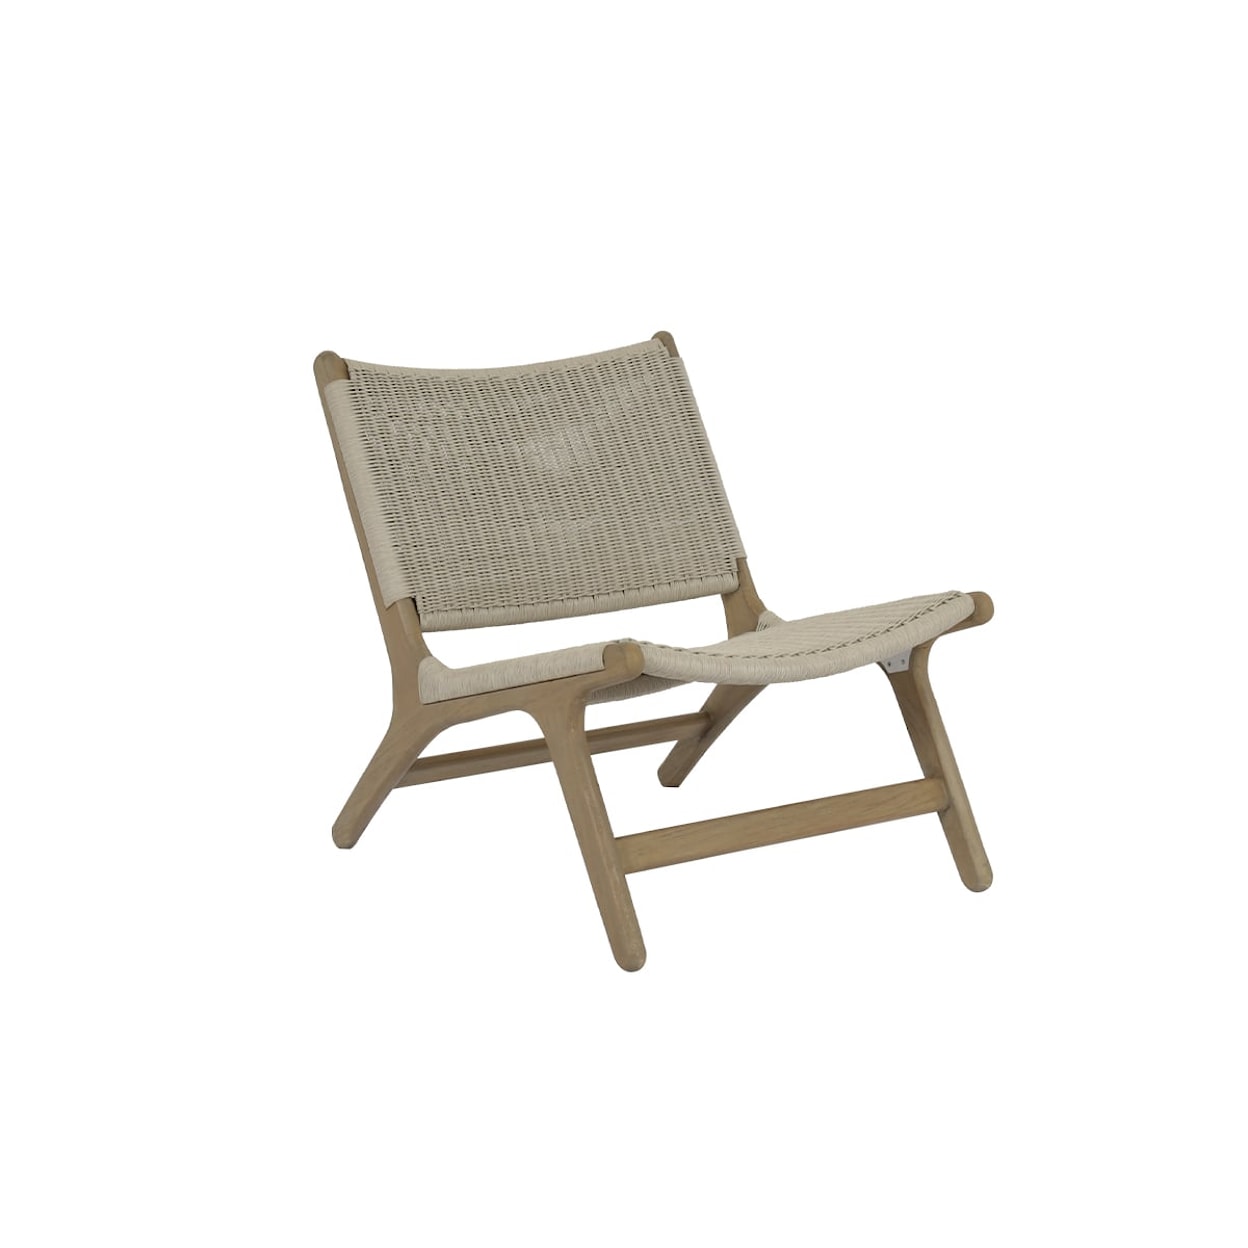 Sunset West Coastal Teak Upholstered Accent Chair